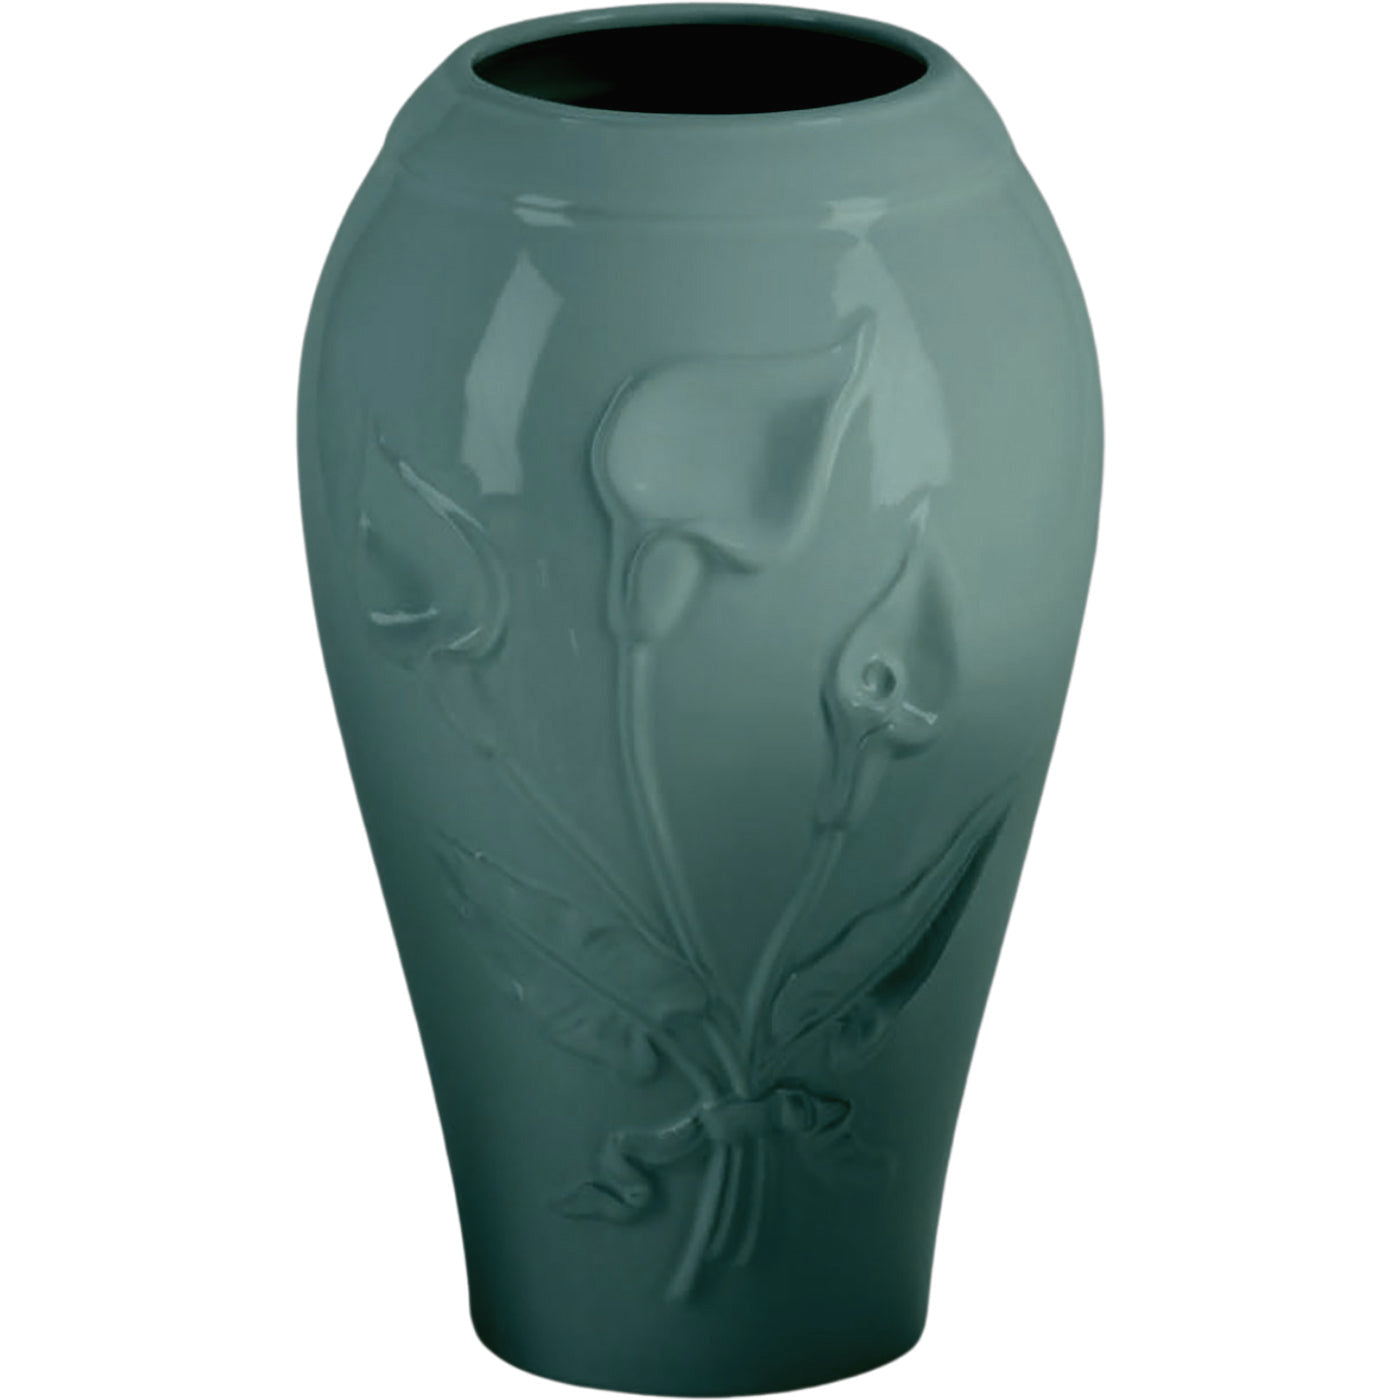 Grave vases Calla green 21x13cm - 8.3x5.1in In green porcelain, ground attached CAL162T/V